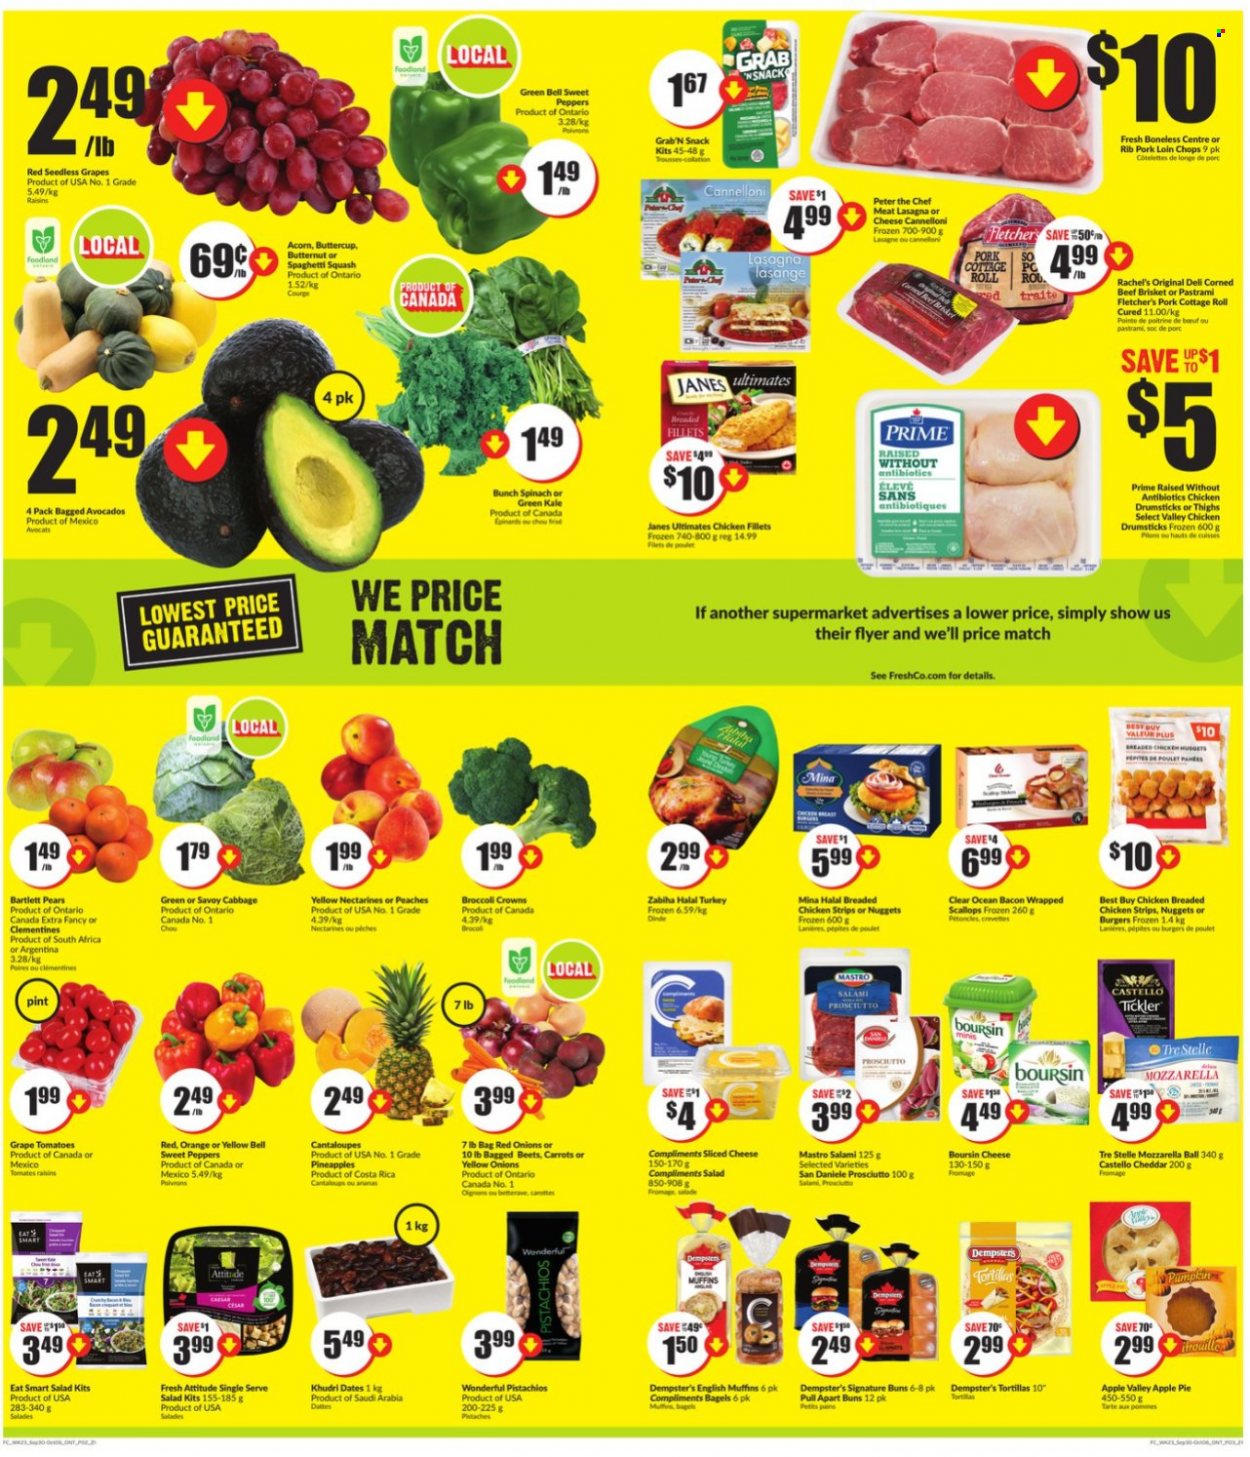 thumbnail - Chalo! FreshCo. Flyer - September 30, 2021 - October 06, 2021 - Sales products - english muffins, tortillas, pie, buns, apple pie, butternut squash, cabbage, cantaloupe, carrots, sweet peppers, tomatoes, kale, pumpkin, onion, salad, peppers, avocado, Bartlett pears, clementines, nectarines, seedless grapes, pineapple, pears, peaches, bacon wrapped scallops, scallops, spaghetti, nuggets, fried chicken, bacon, salami, prosciutto, pastrami, corned beef, sliced cheese, cheddar, strips, chicken strips, snack, dried fruit, pistachios, chicken drumsticks, chicken, beef meat, beef brisket, pork chops, pork loin, pork meat, mozzarella, raisins, oranges. Page 2.